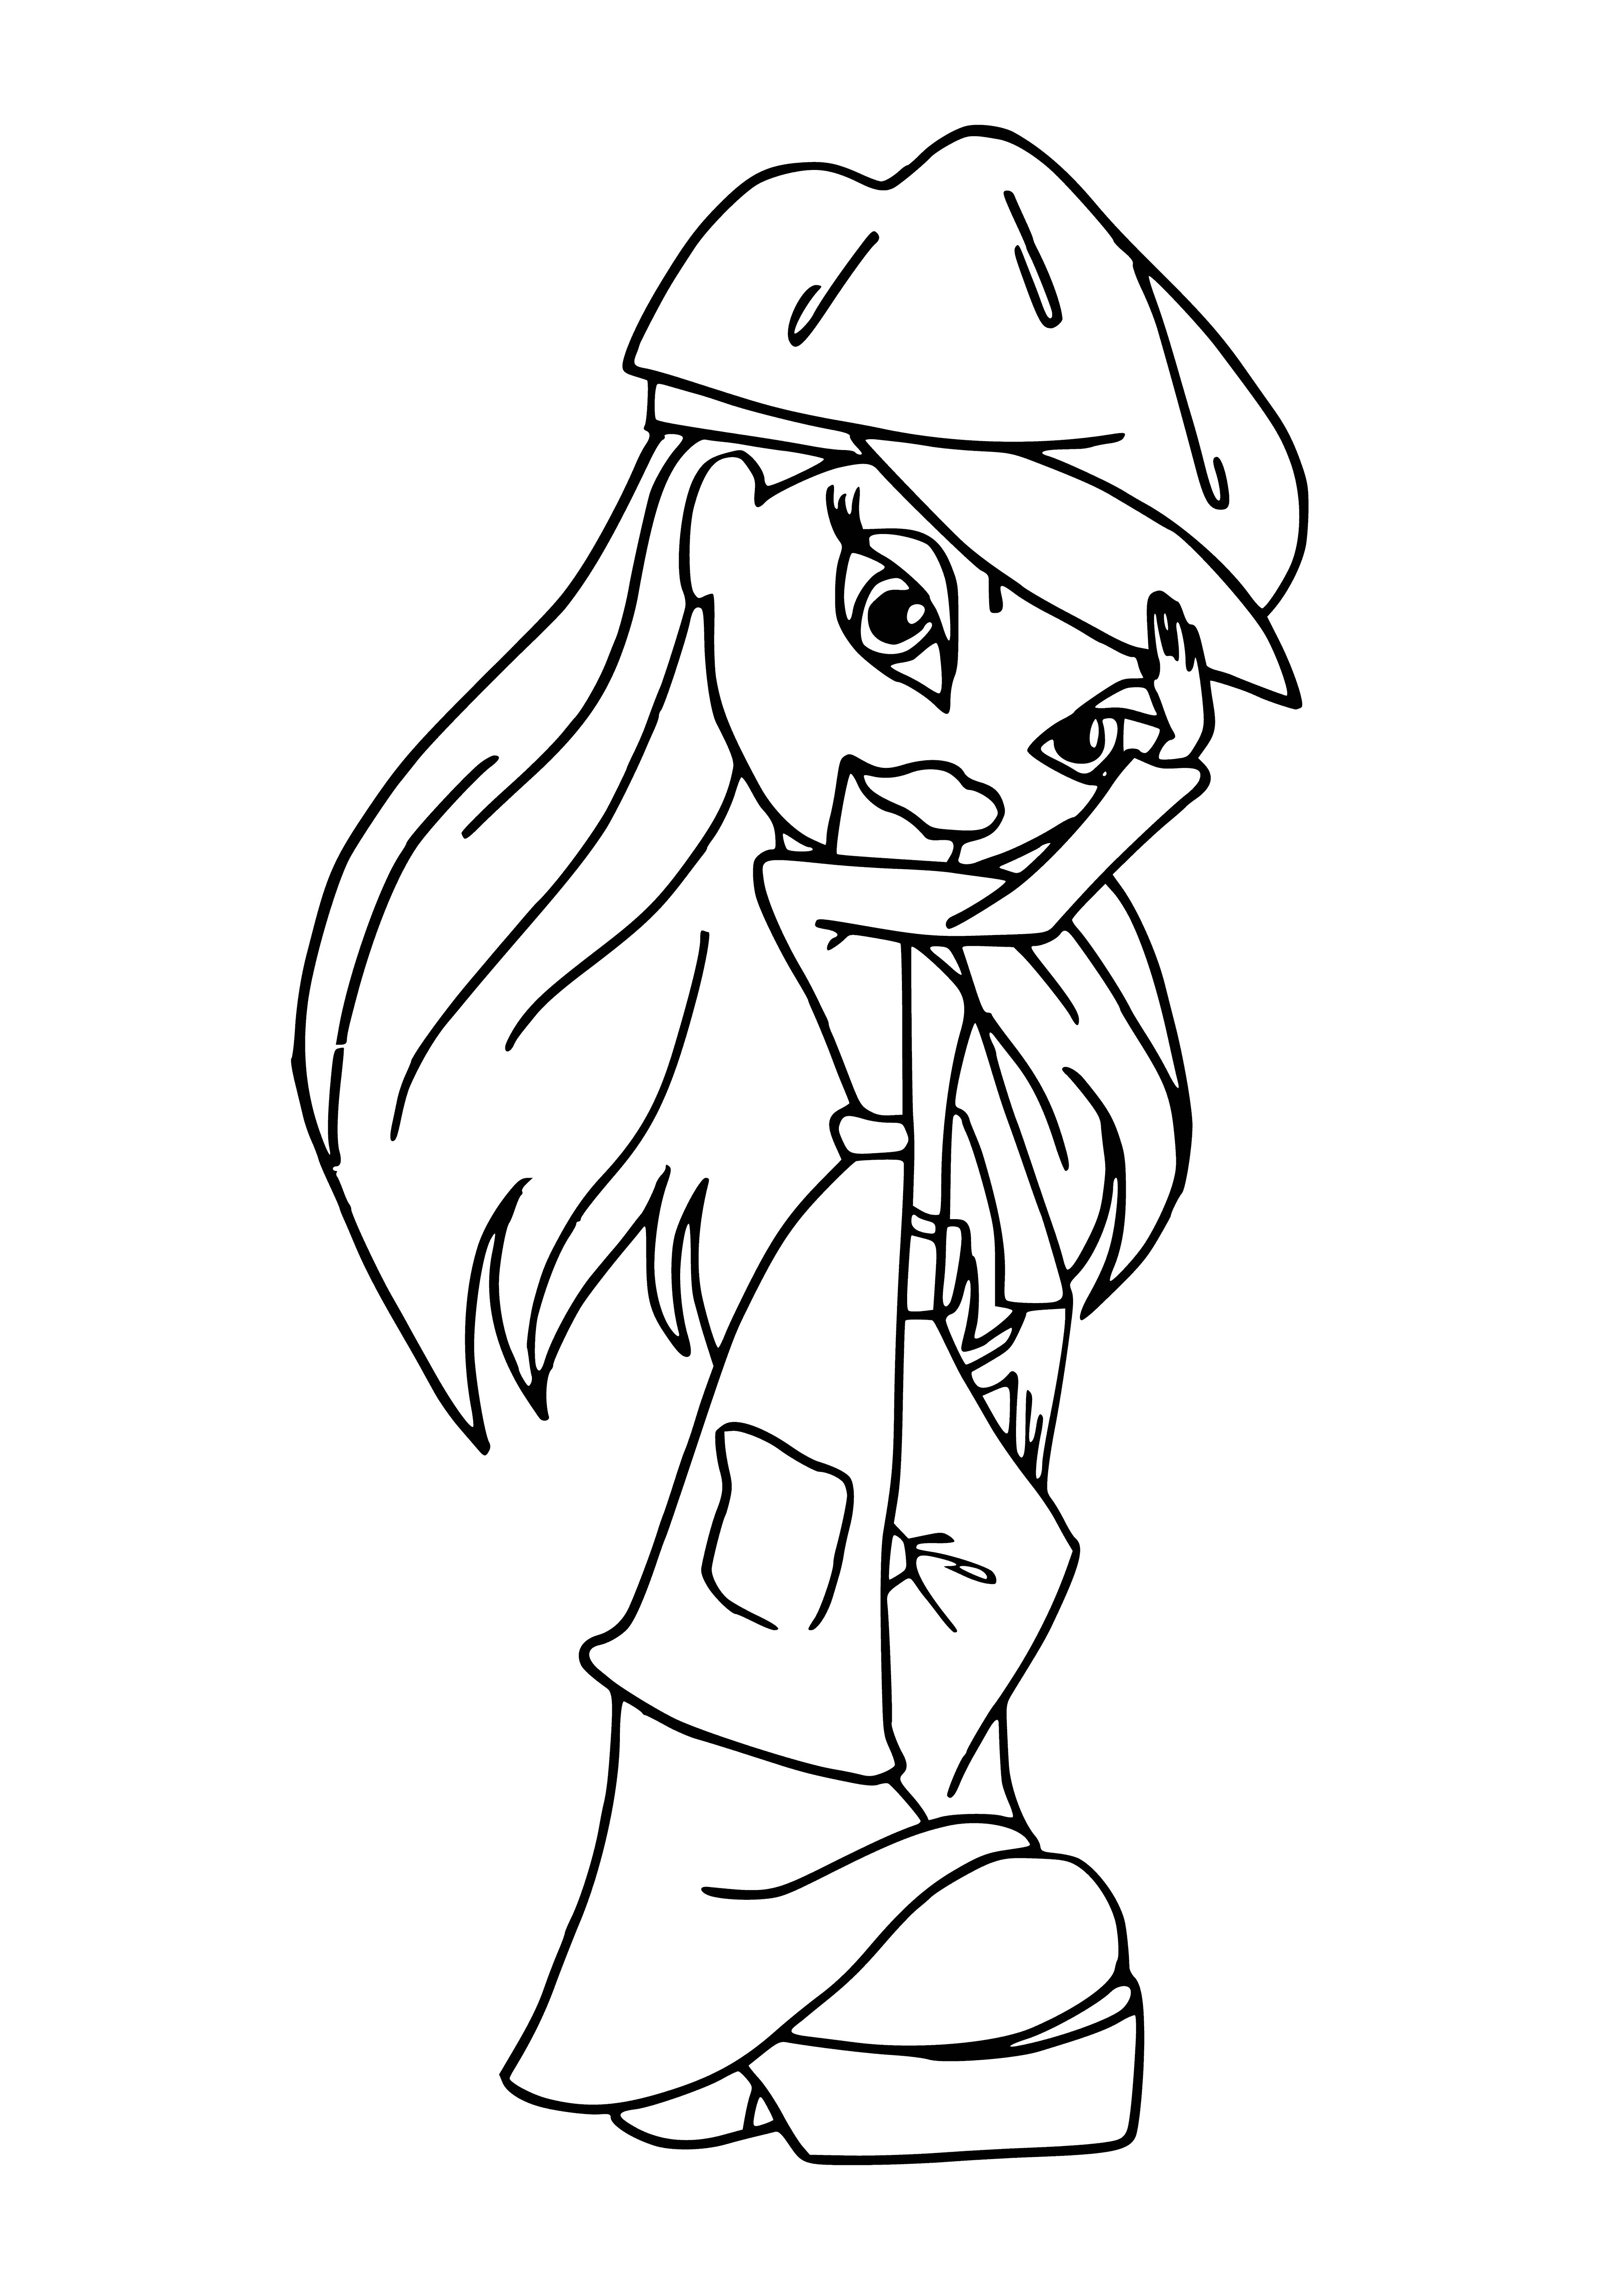 coloring page: Five Bratz - Fashionistas dolls with various hairstyles, clothes and shopping bags, two with the logo. #fashion #dolls #coloringpage